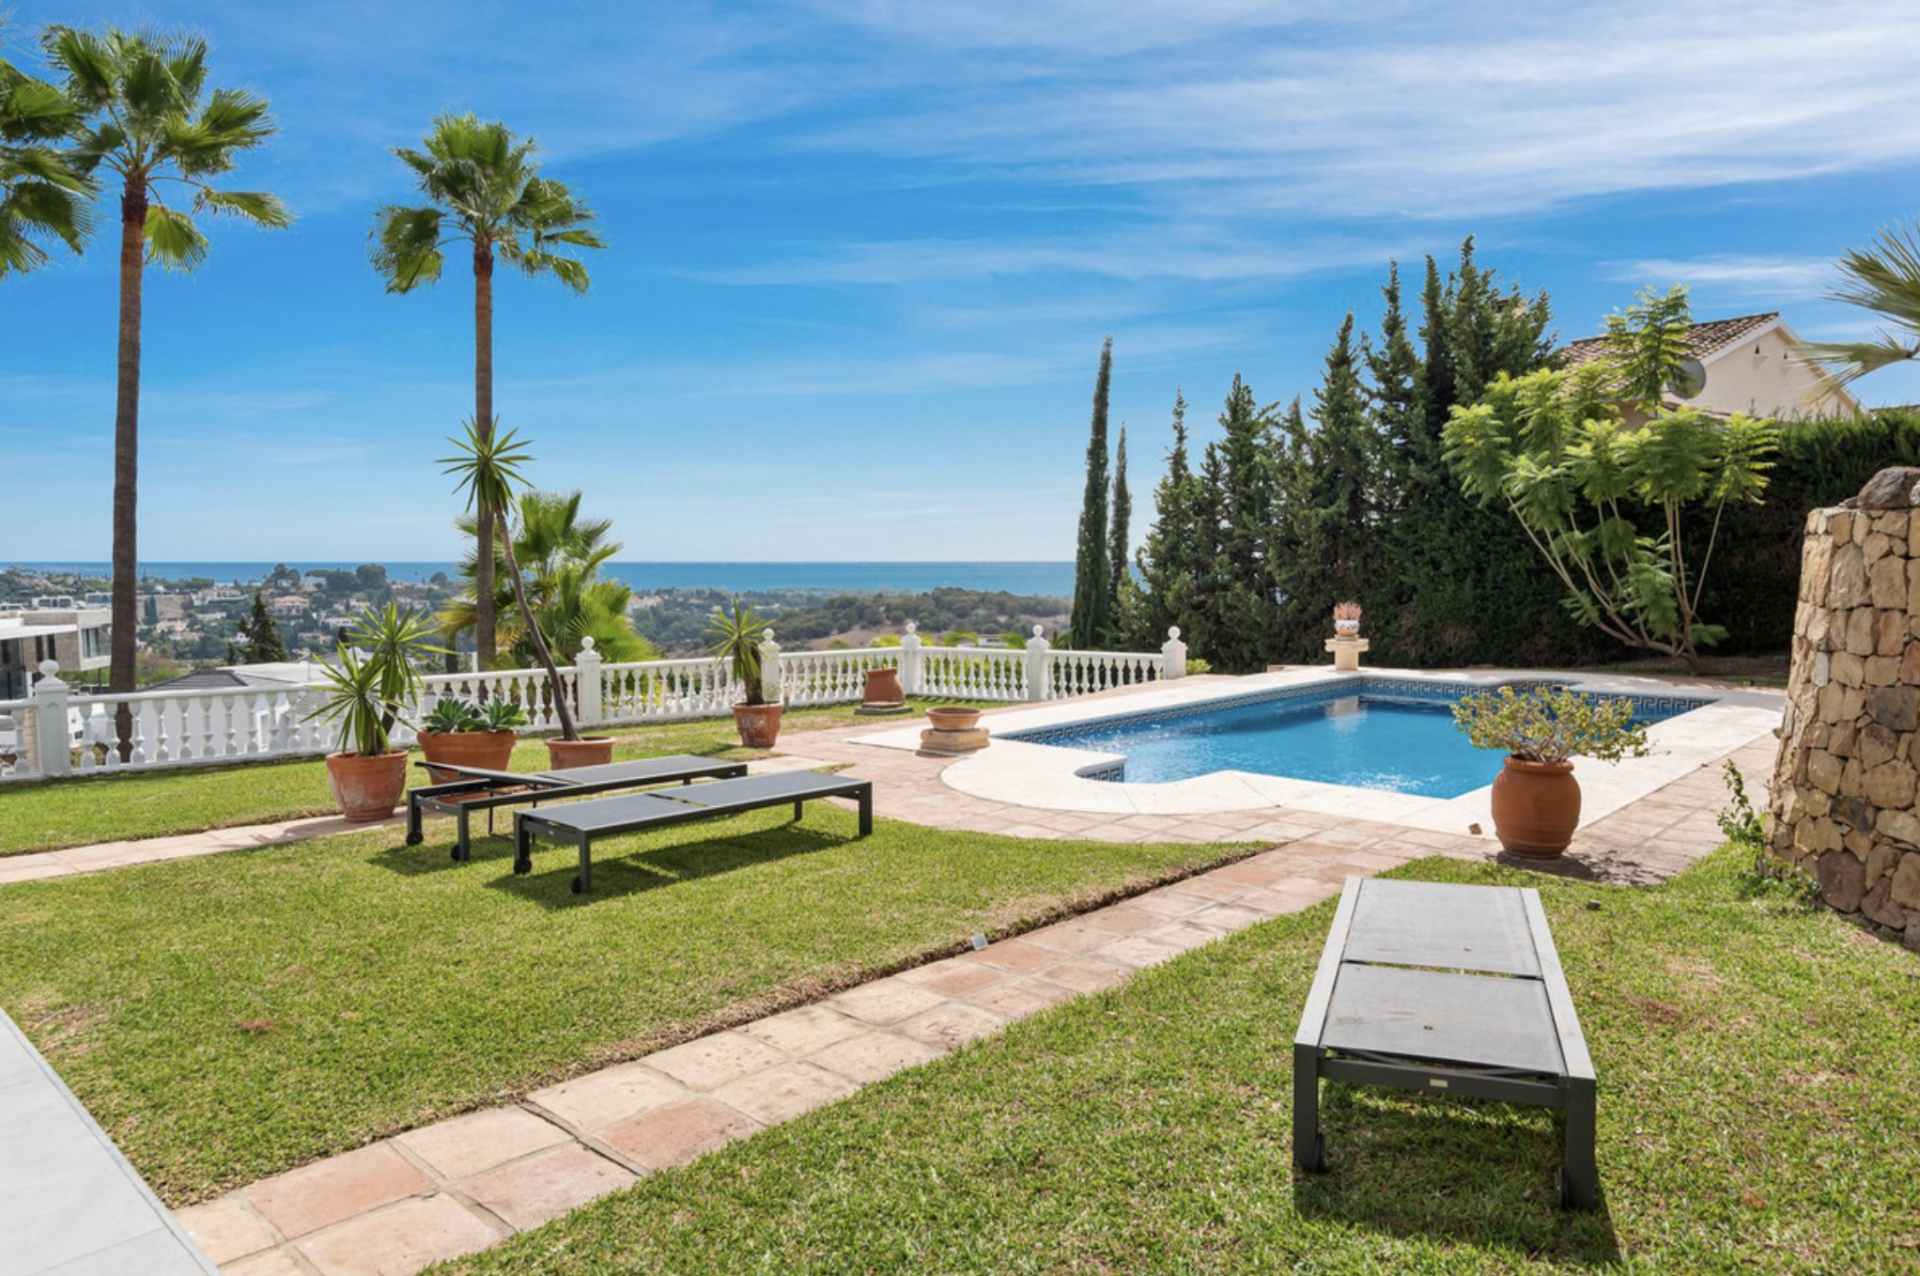 Impeccably renovated 4-bedroom villa situated in the highly sought-after El Paraiso Alto